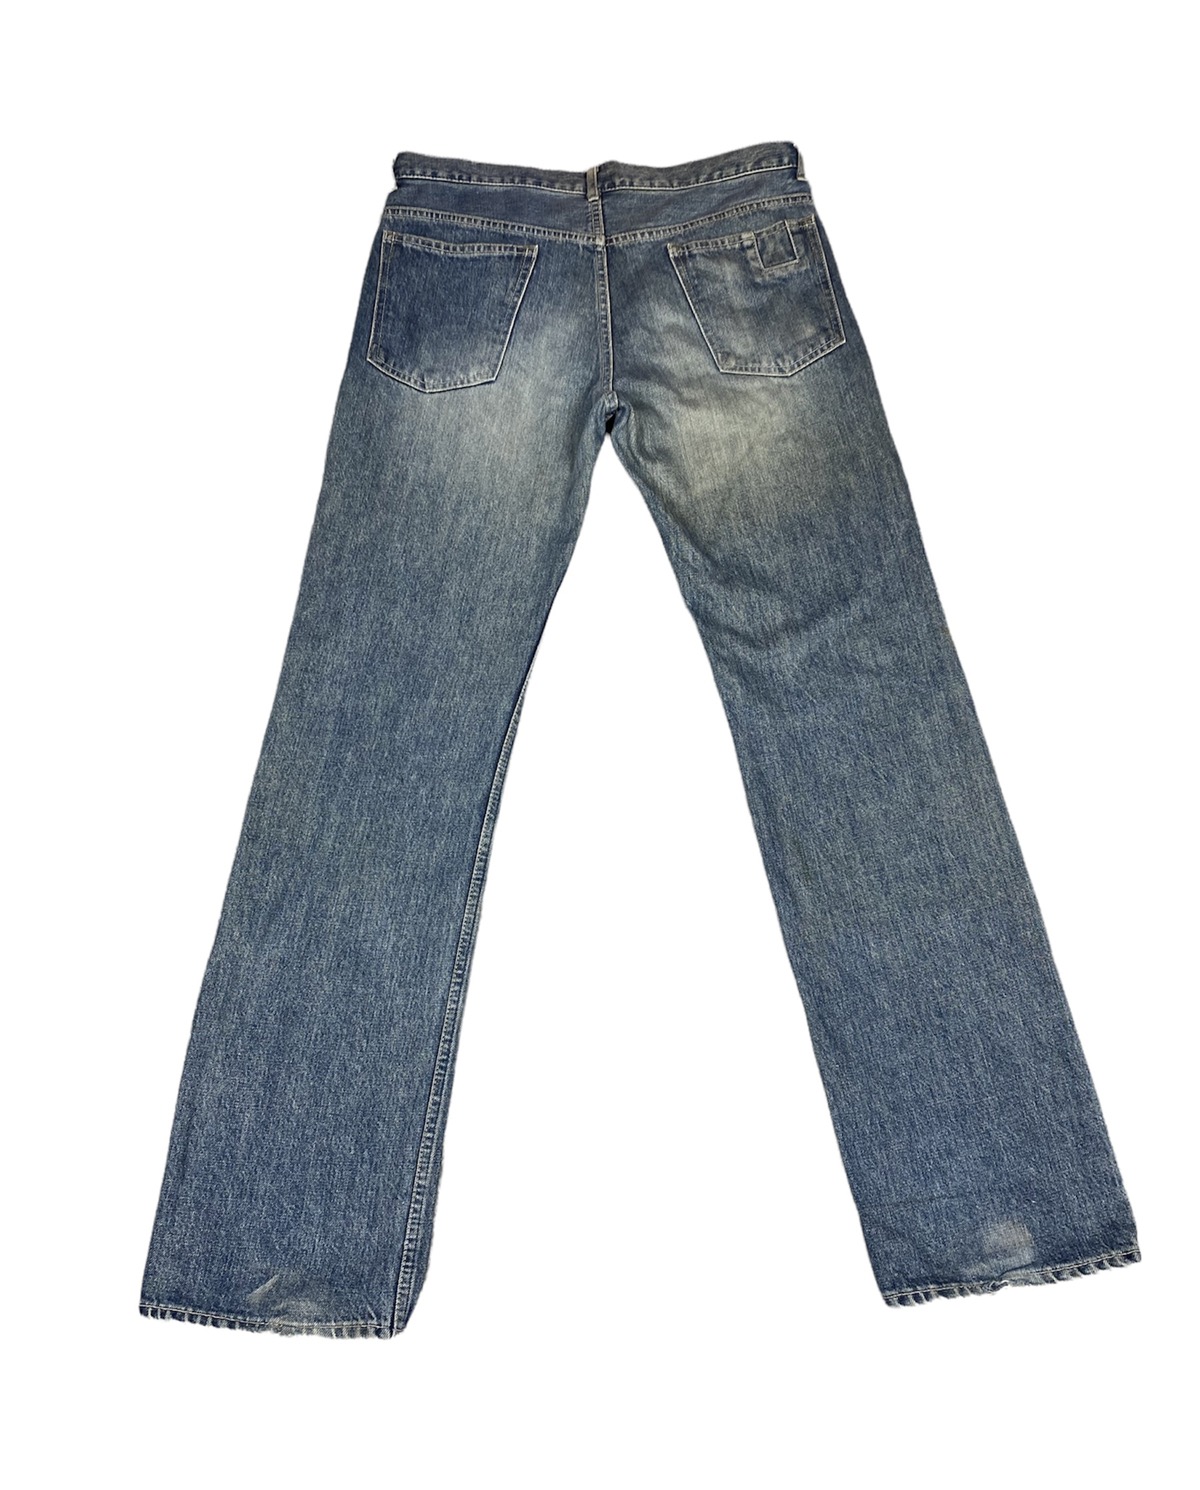 N. Hollywood Denim Faded Jeans. S0208 - 2